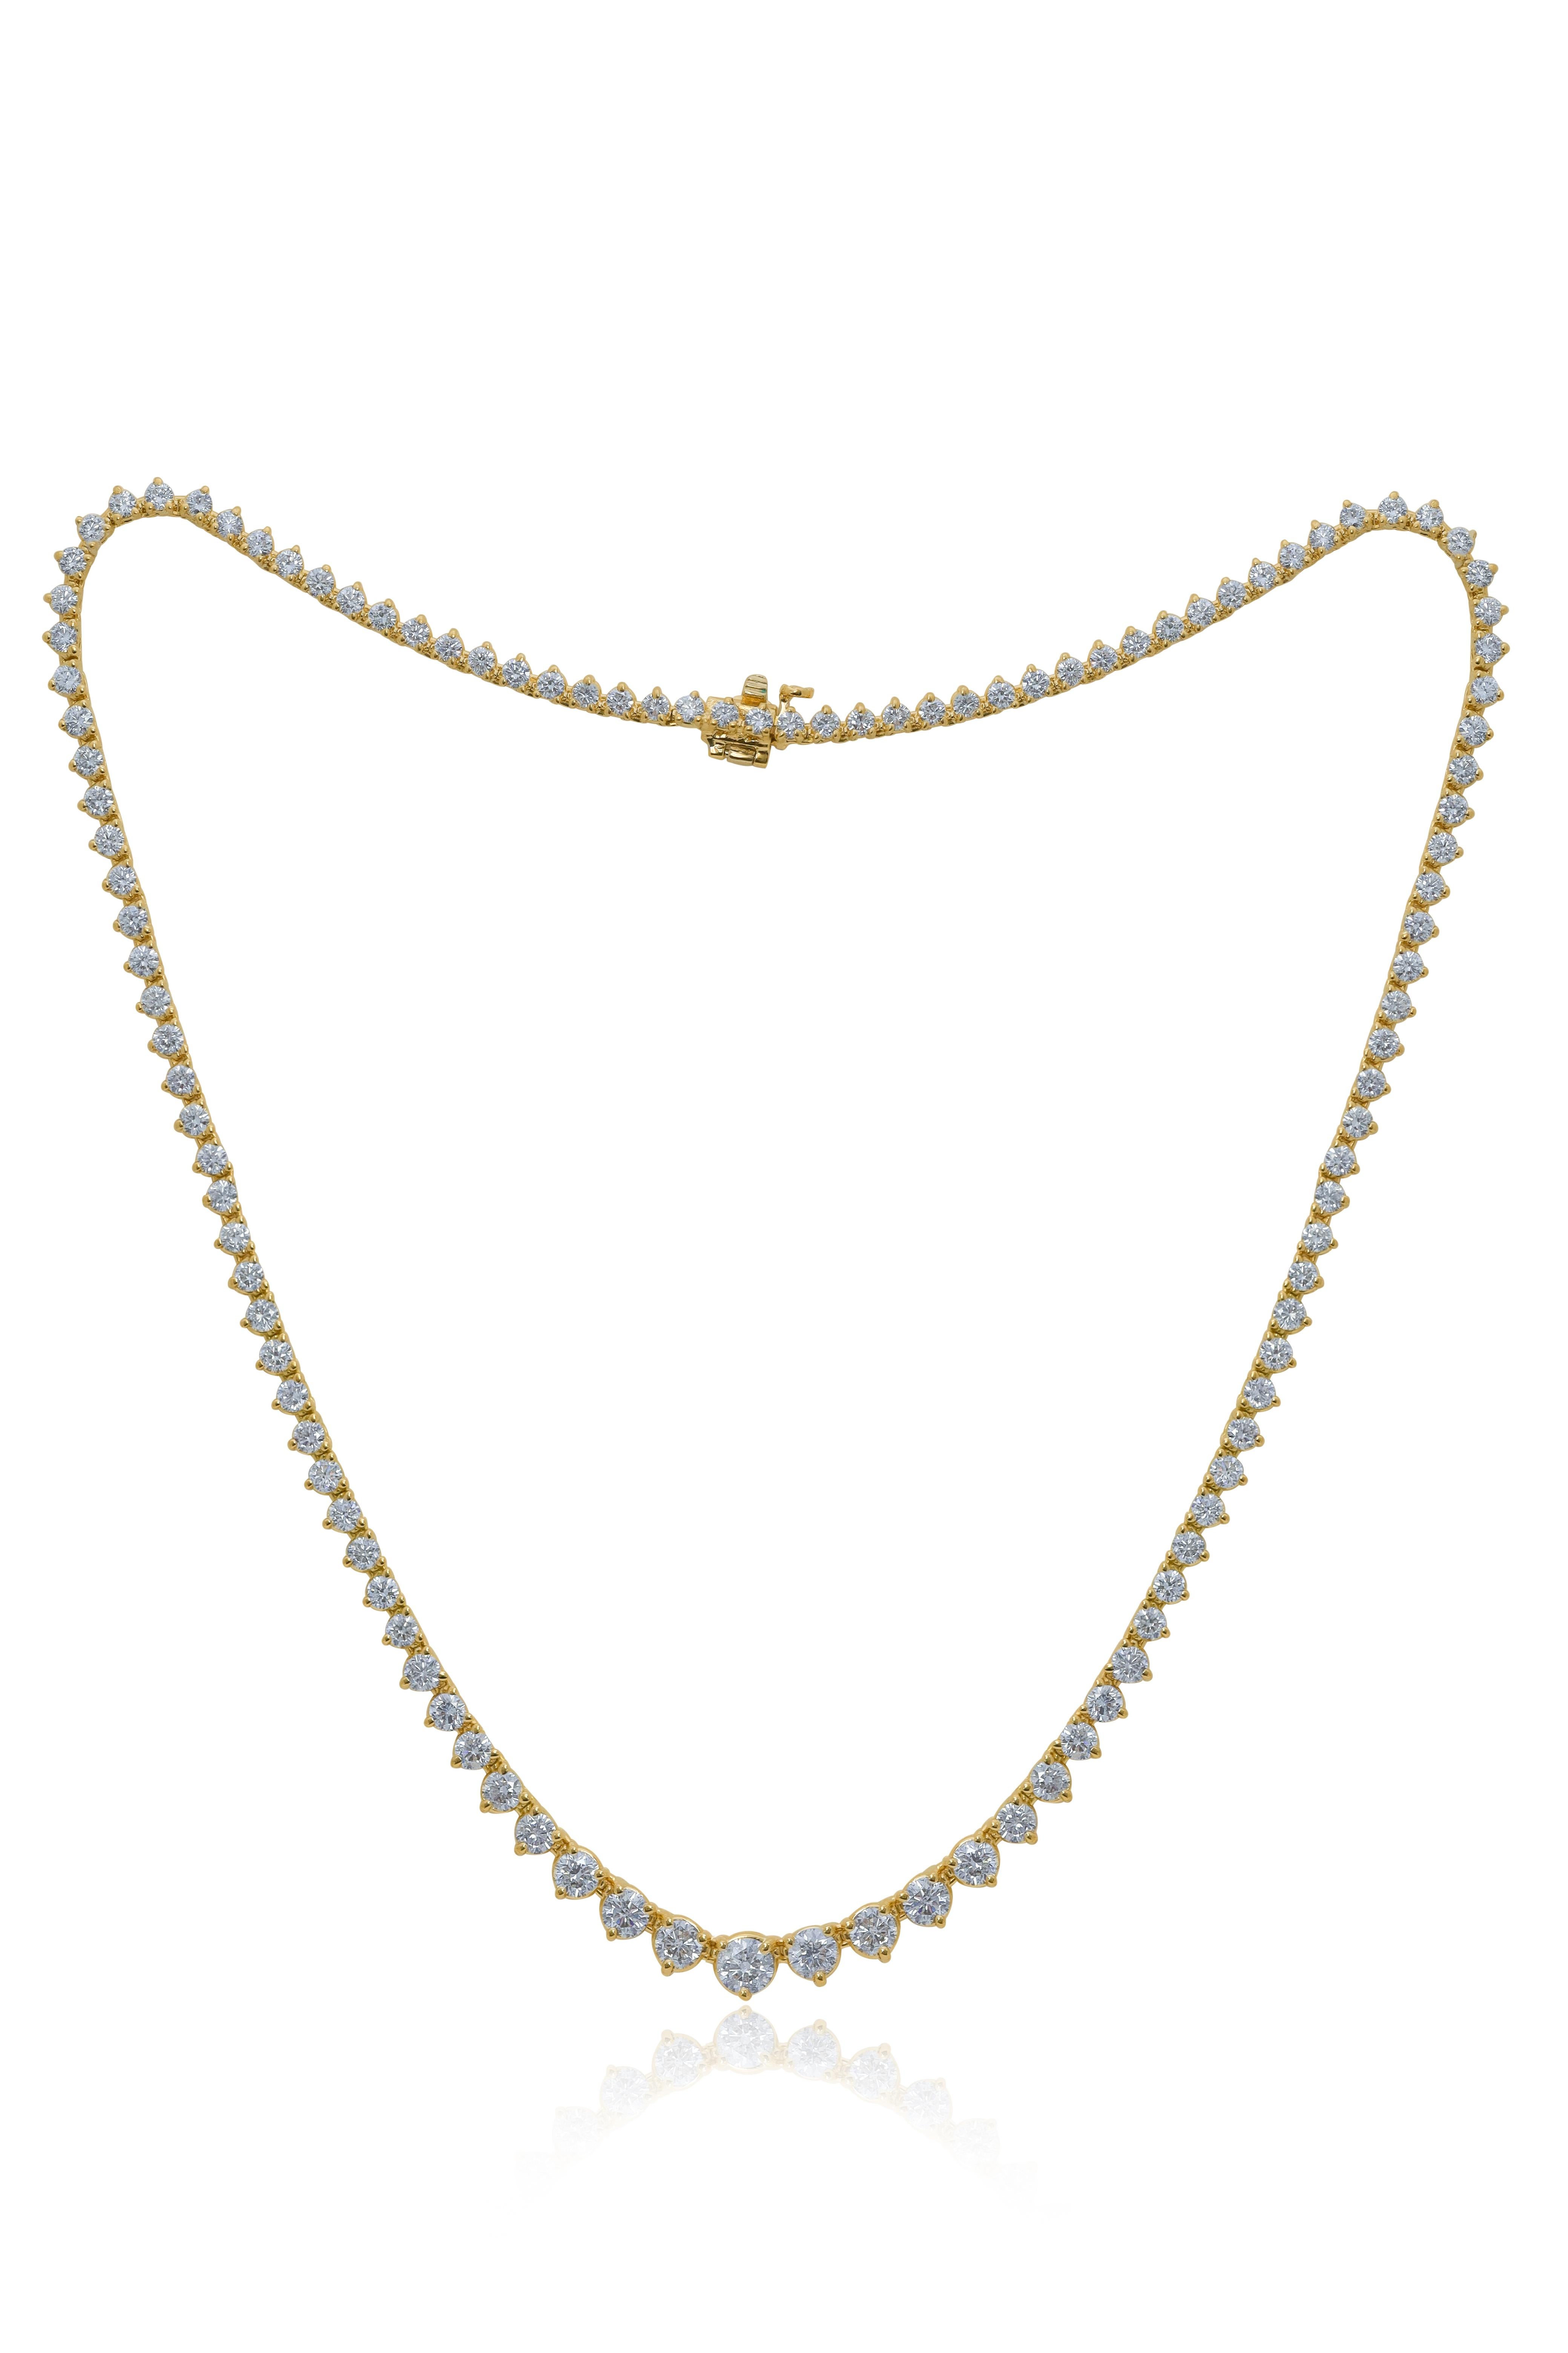 18kt yellow gold graduated tennis necklace featuring 11.15 cts of round diamonds
Diana M. is a leading supplier of top-quality fine jewelry for over 35 years.
Diana M is one-stop shop for all your jewelry shopping, carrying line of diamond rings,